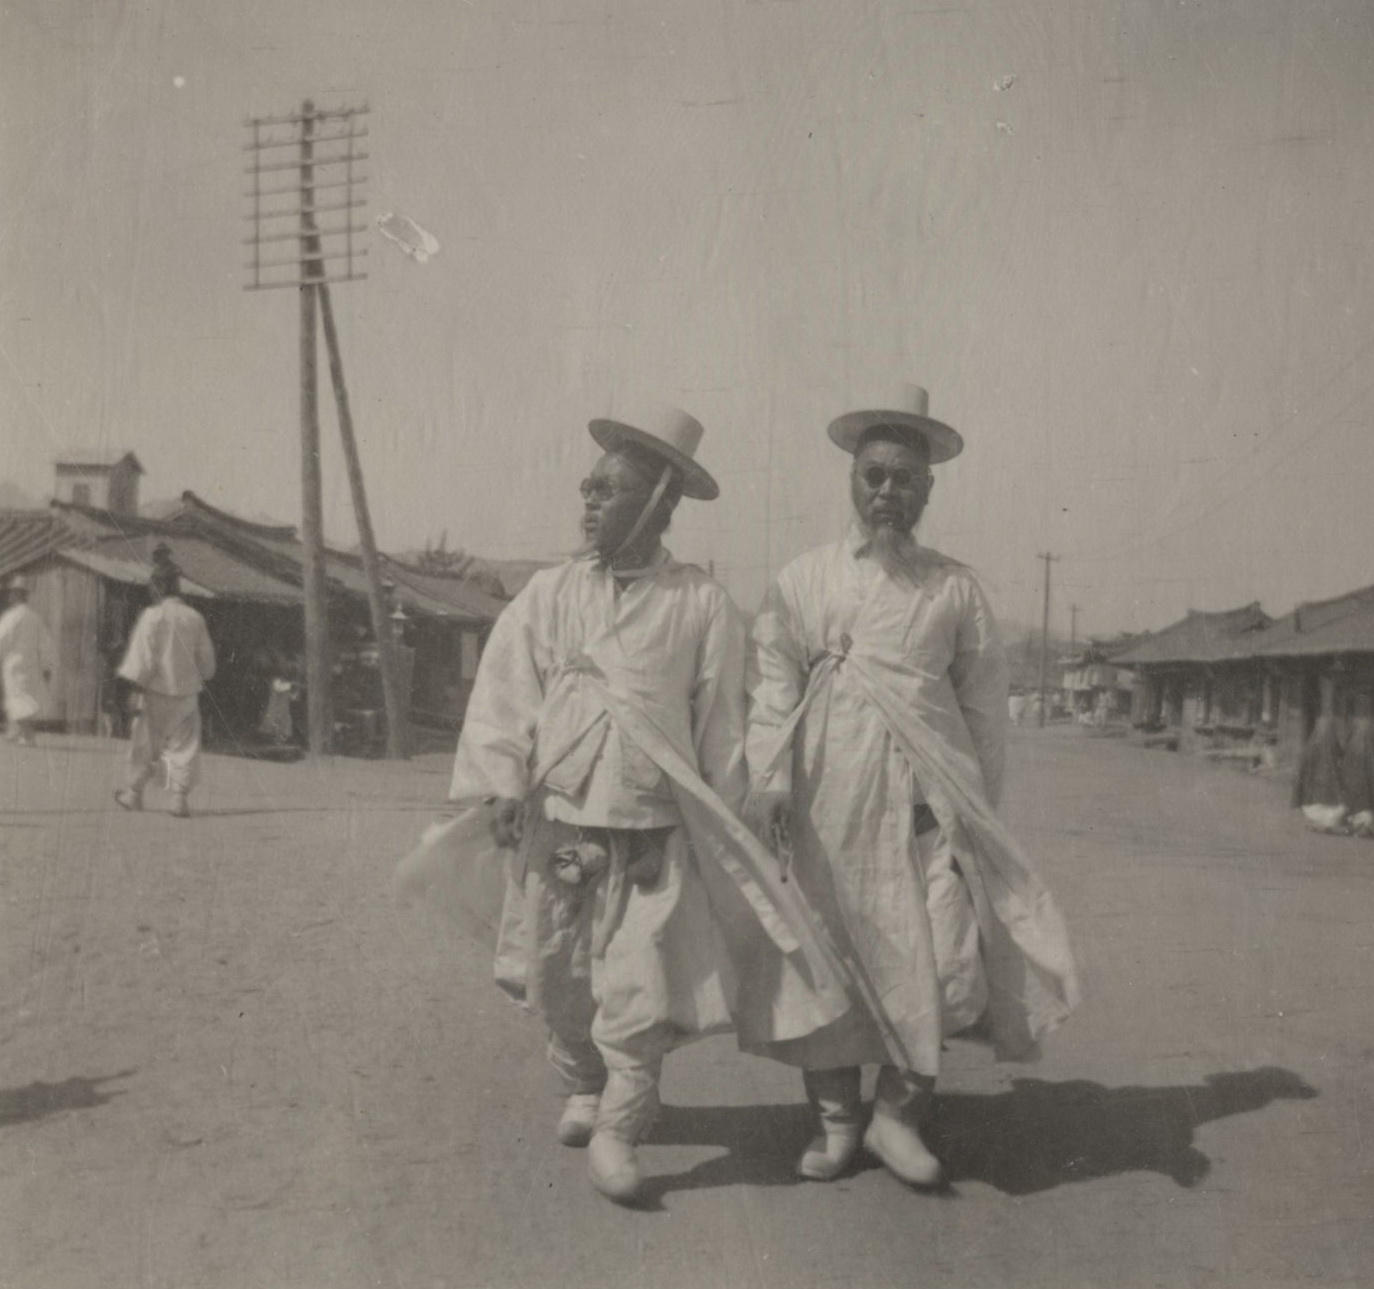 Old Photographs of Life in Korea (26)